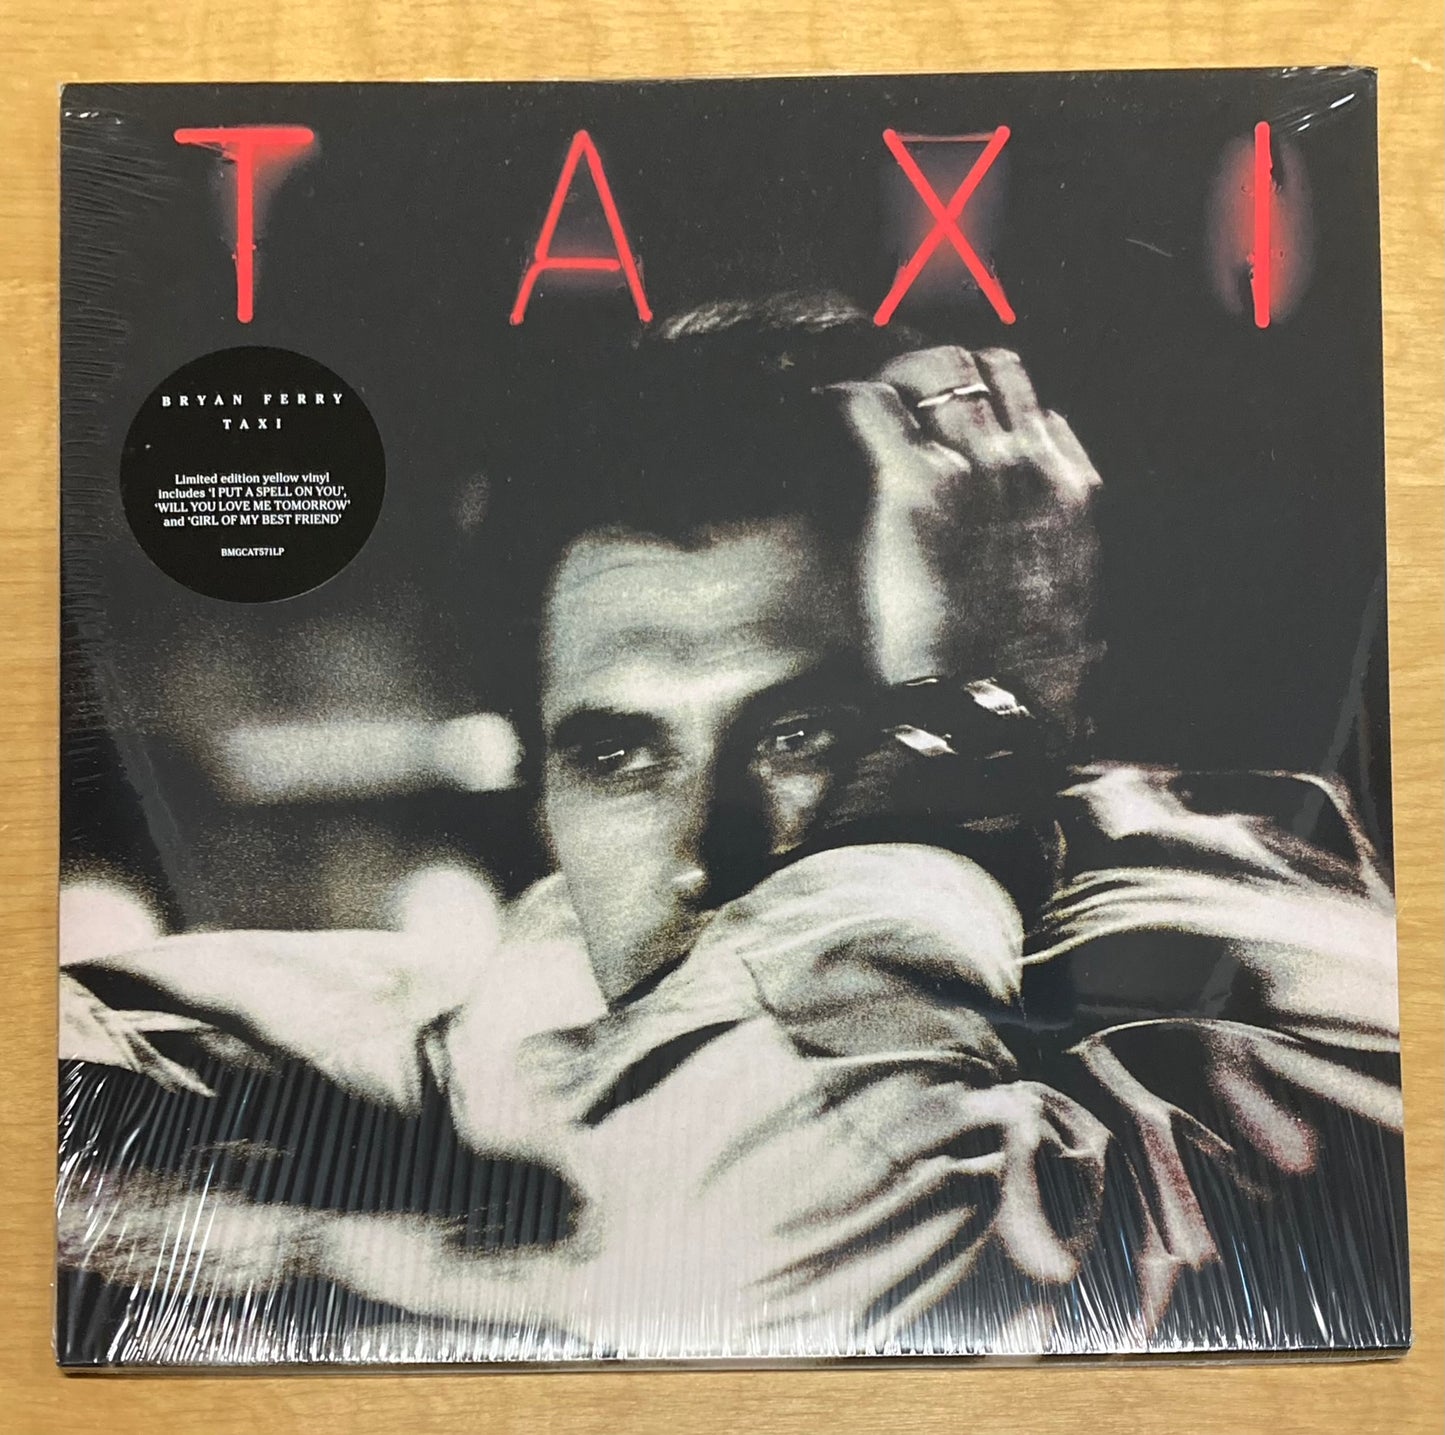 Taxi - Bryan Ferry *Sealed/Never Opened. Yellow Vinyl*